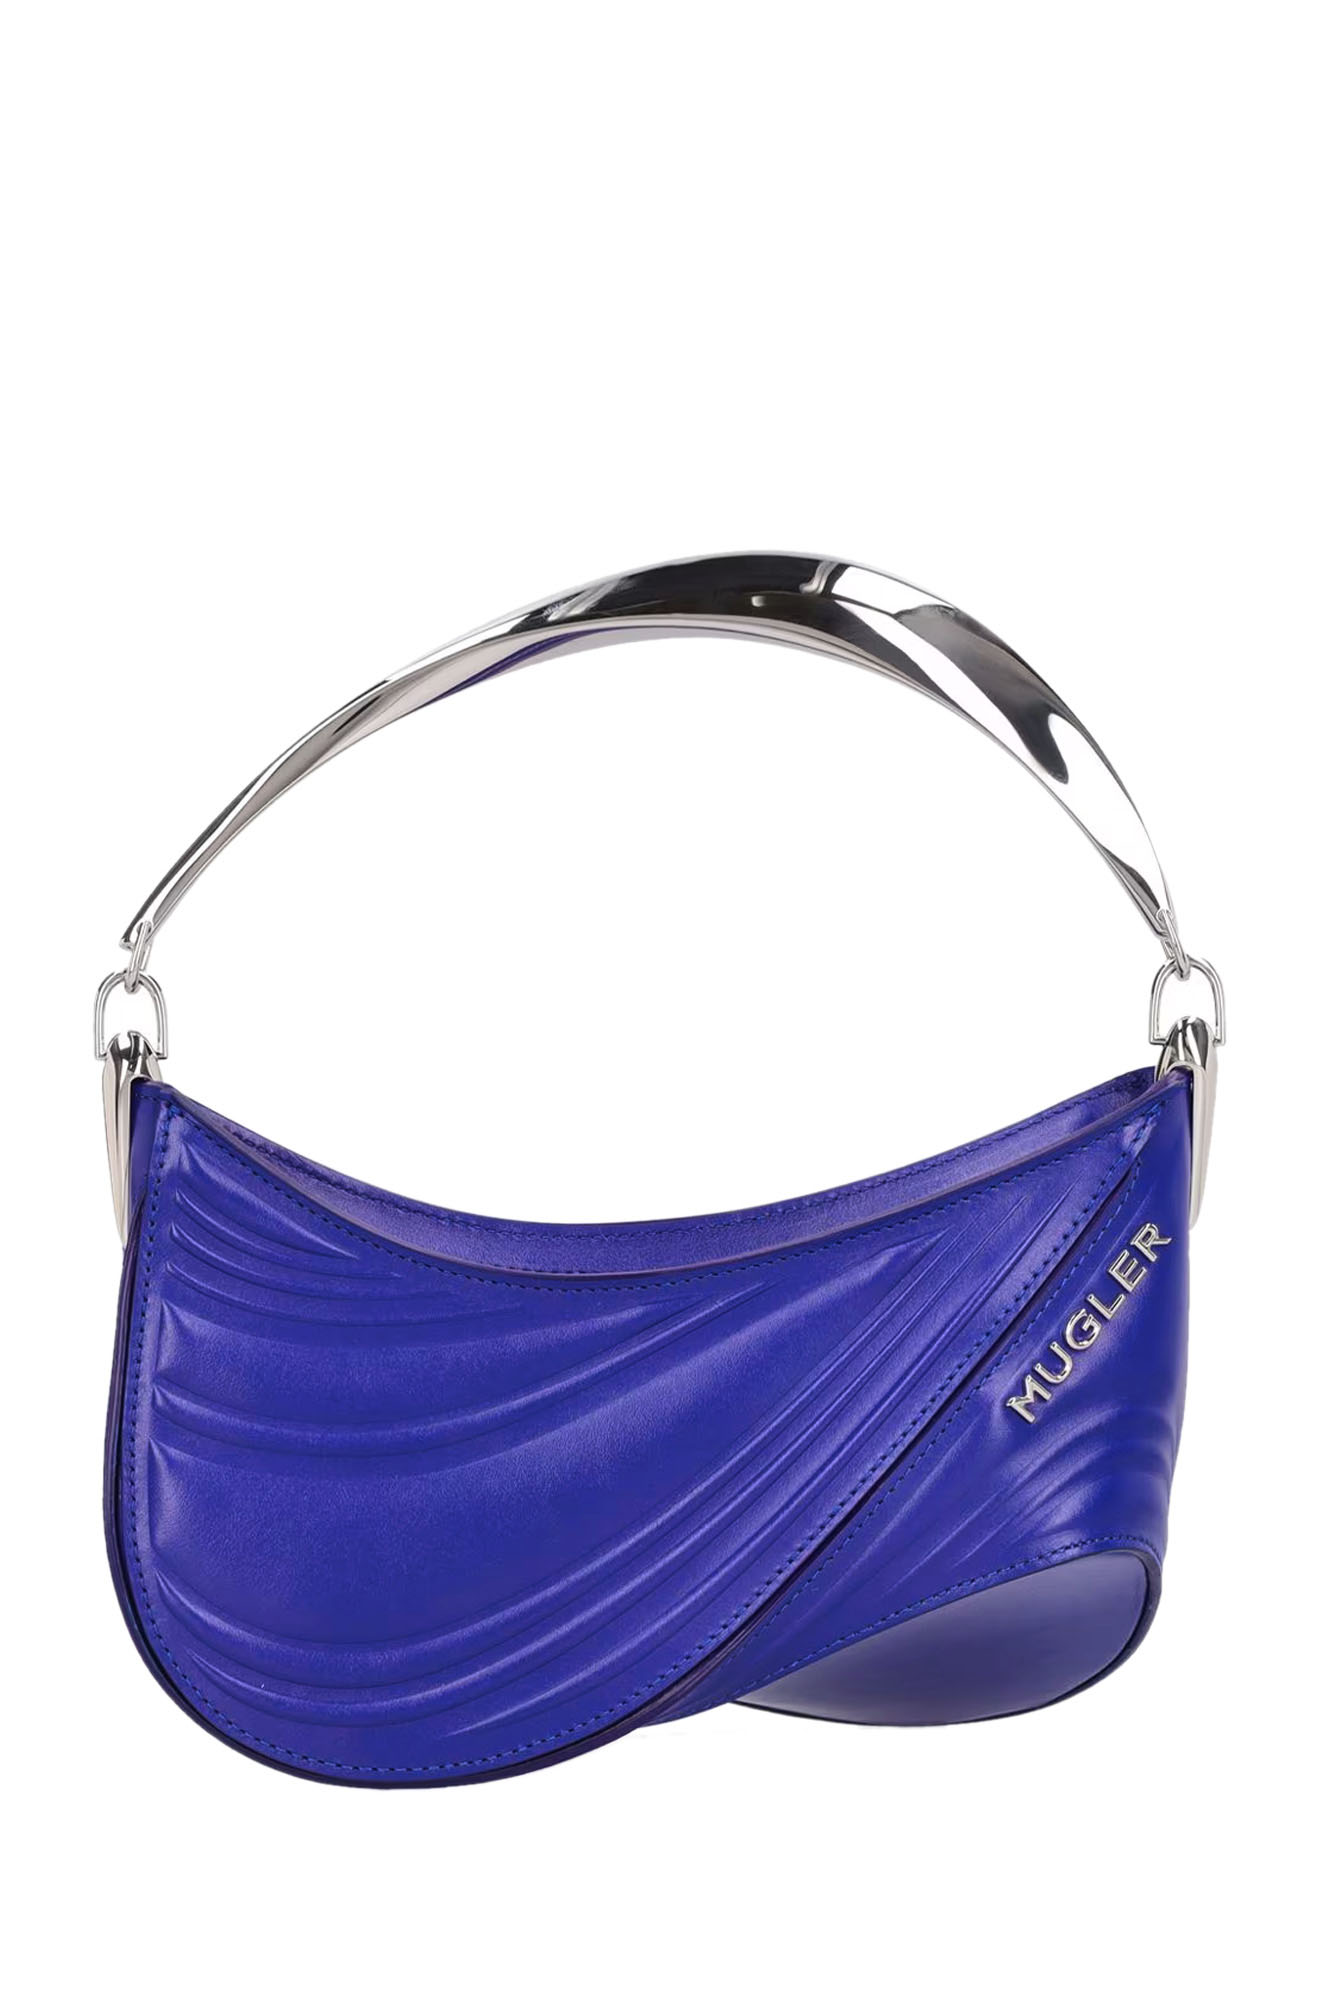 Mugler Small Spiral Mh Bag In Electric Blue